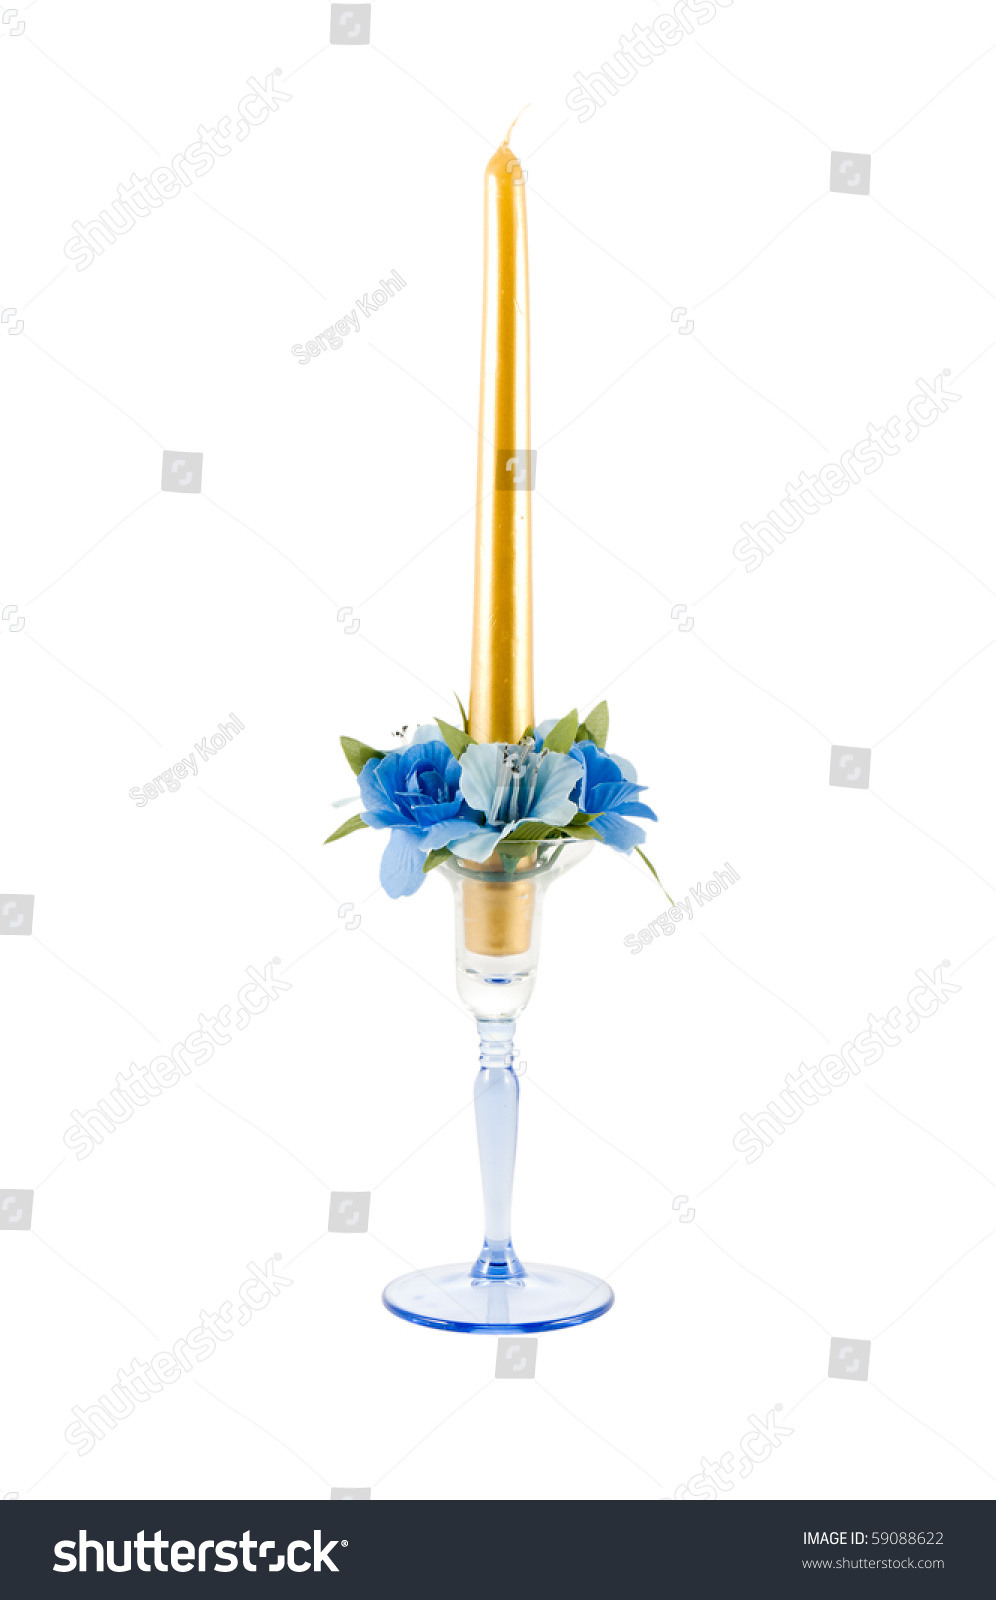 The Candle In A Candlestick. Stock Photo 59088622 : Shutterstock